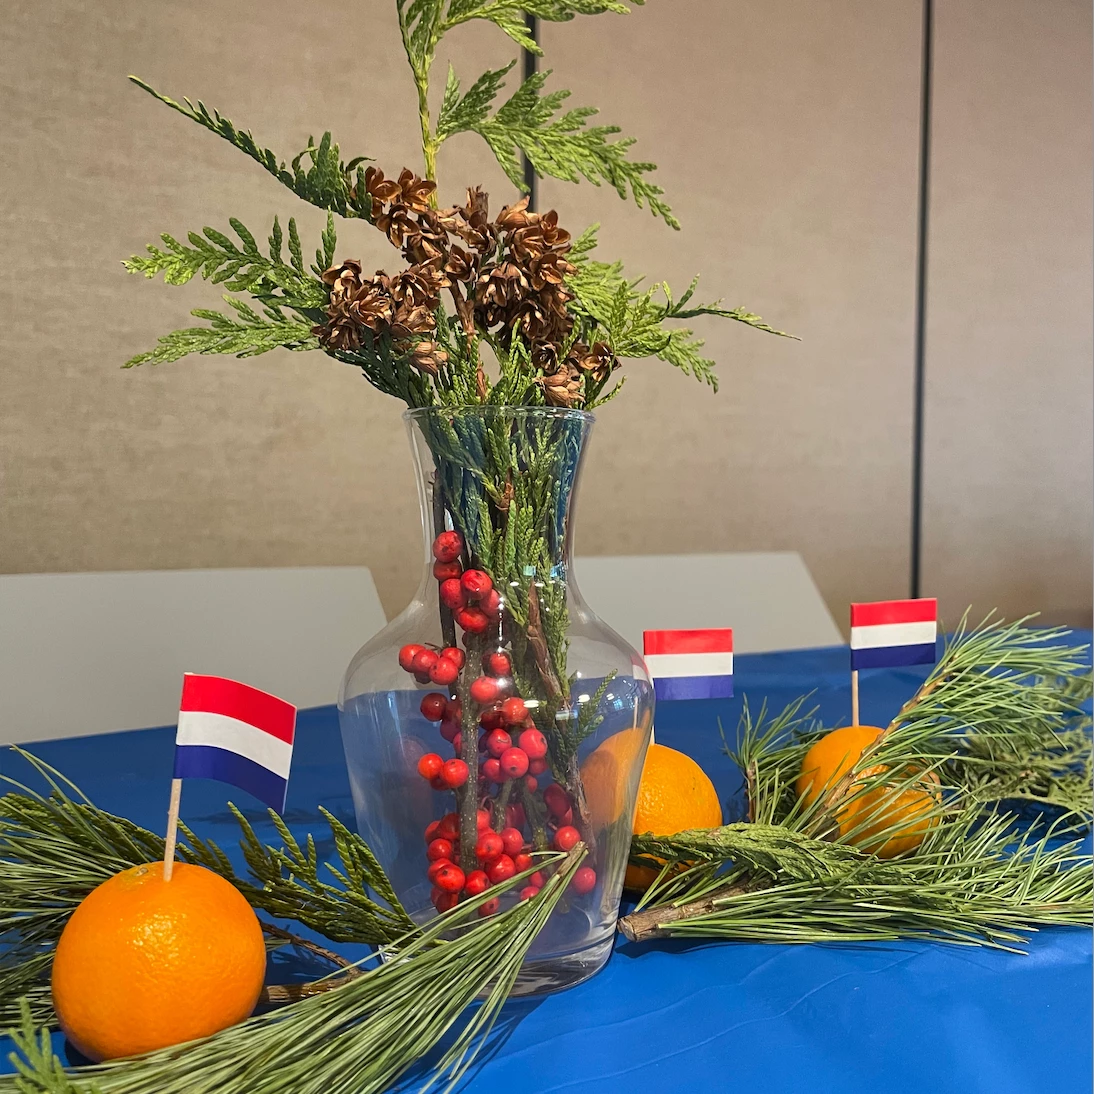 French flags stuck in some oranges around greenery in a vase on a table